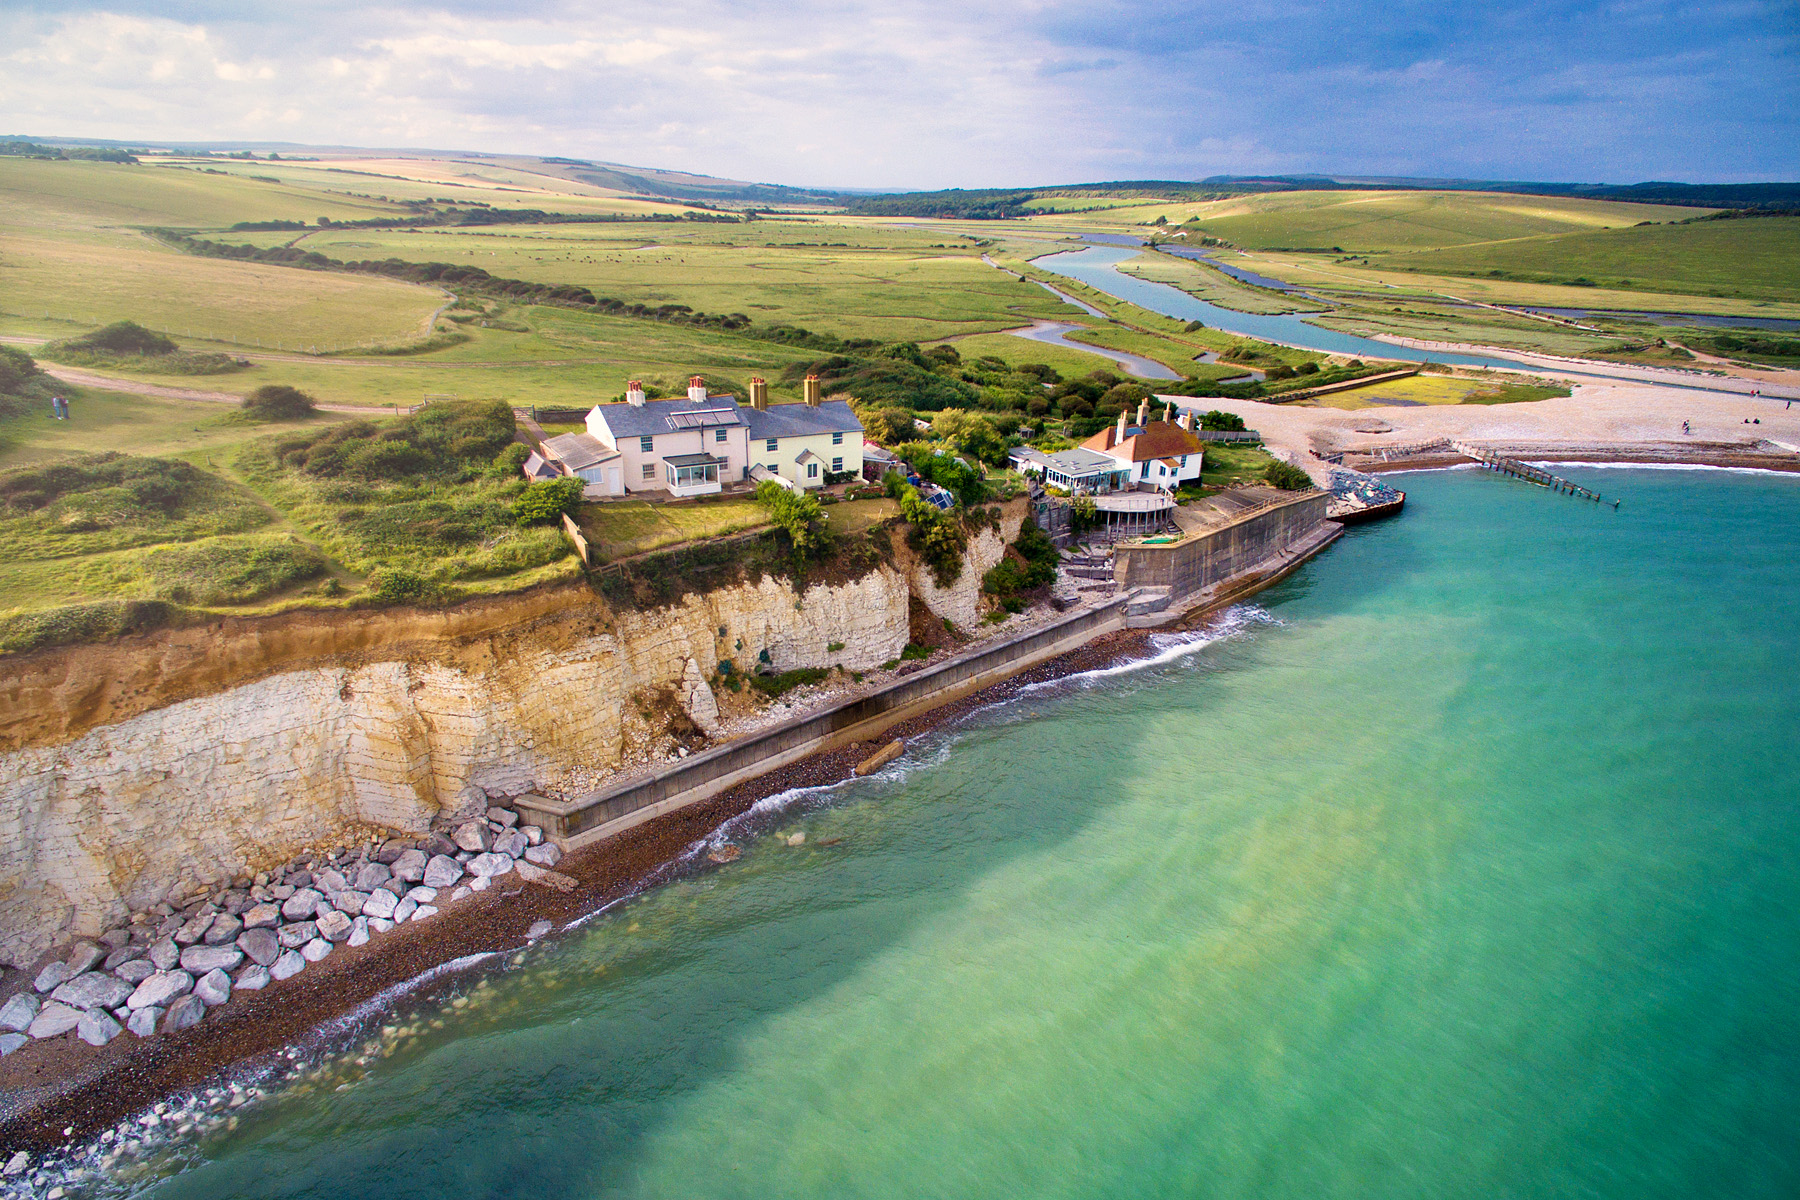 Coastguard Cottages and Cuckmere Haven, Seaford, East Sussex